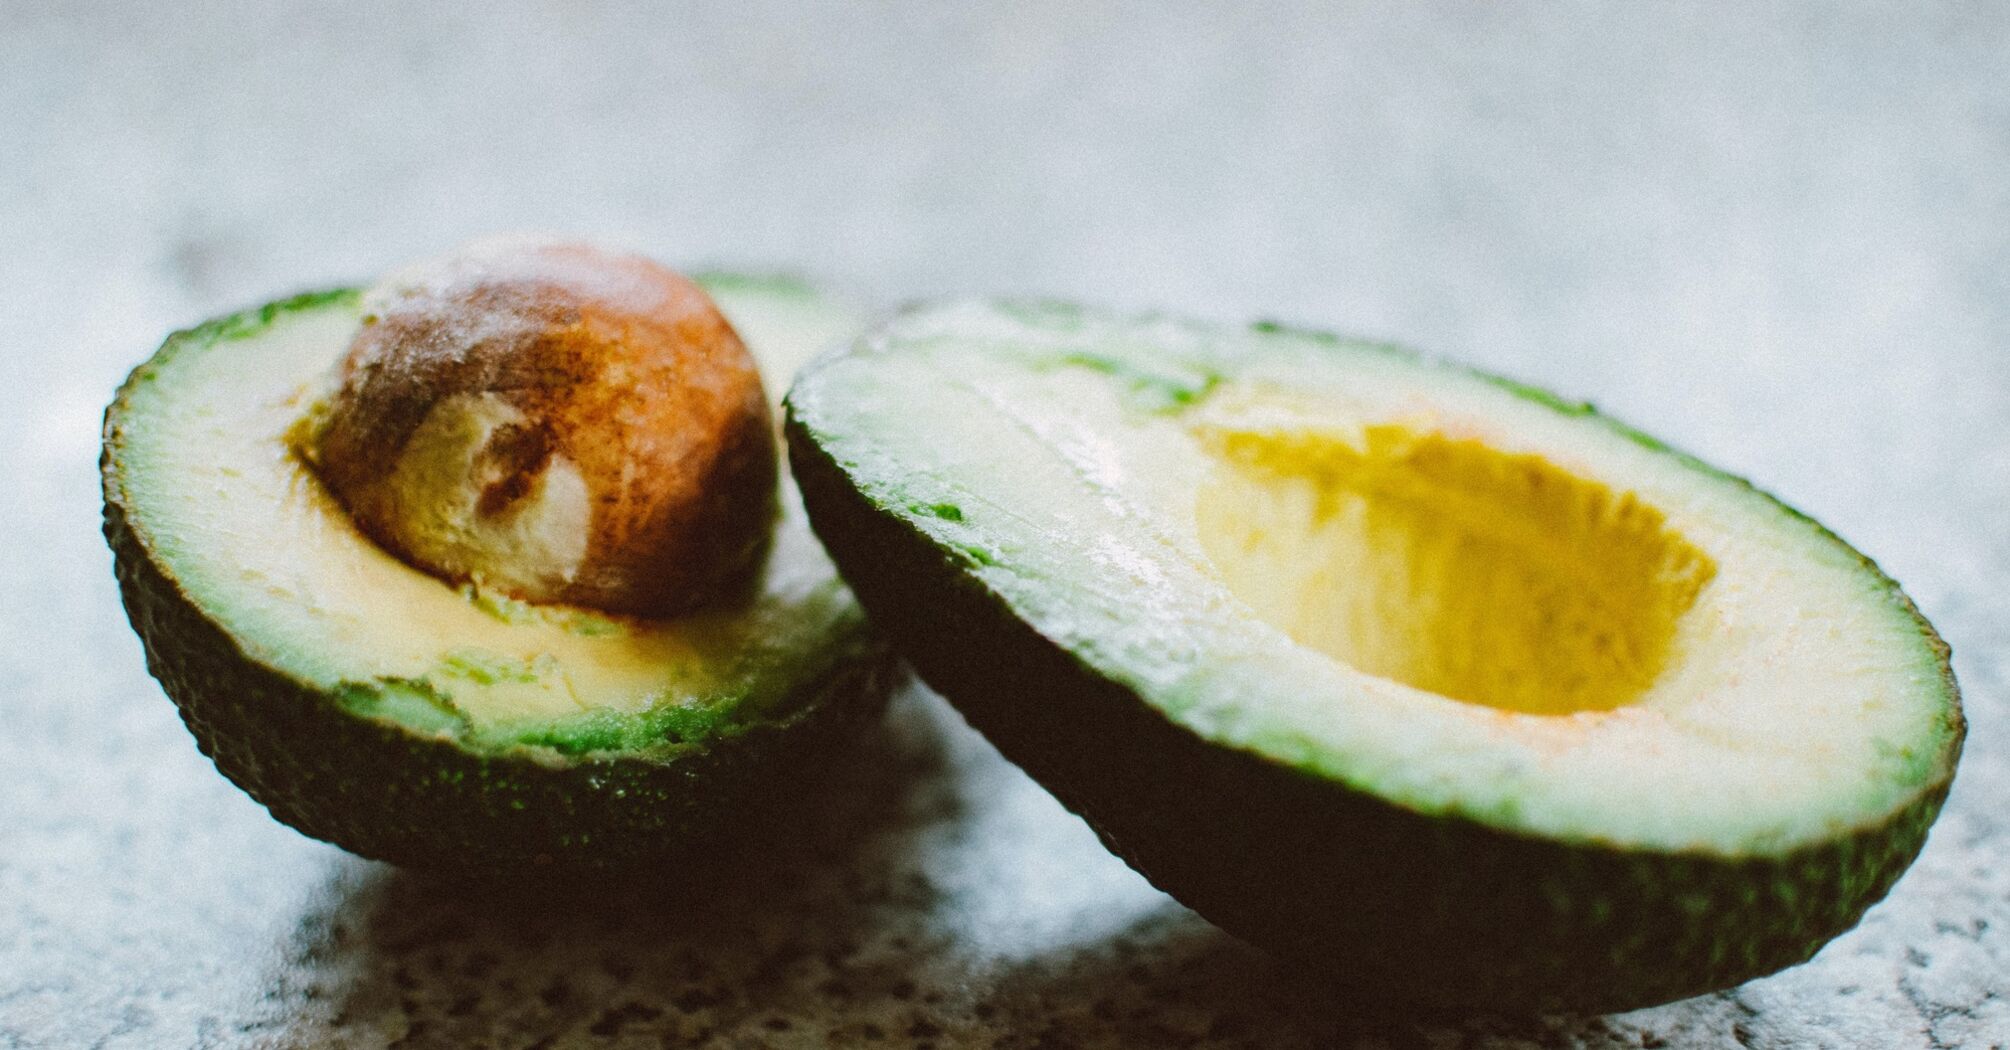 How to speed up the ripening process of avocados